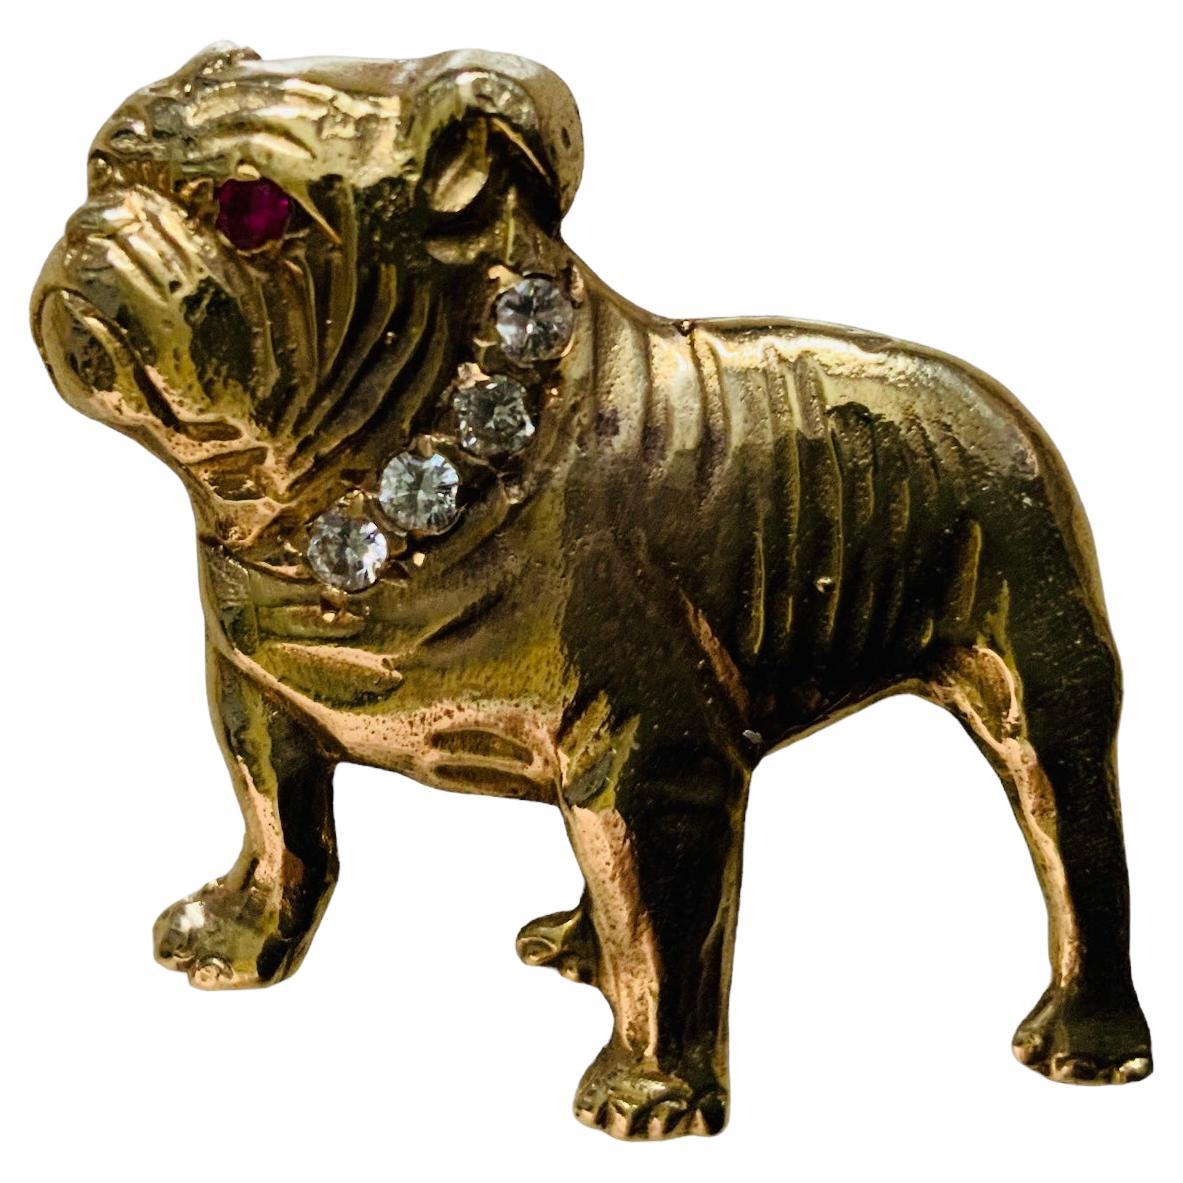 This is a 14K Yellow Gold, Diamond and Ruby Bulldog Pin/Brooch. It depicts a standing up Bulldog adorned with a necklace of four diamonds in pave setting and a ruby eye in the same setting.